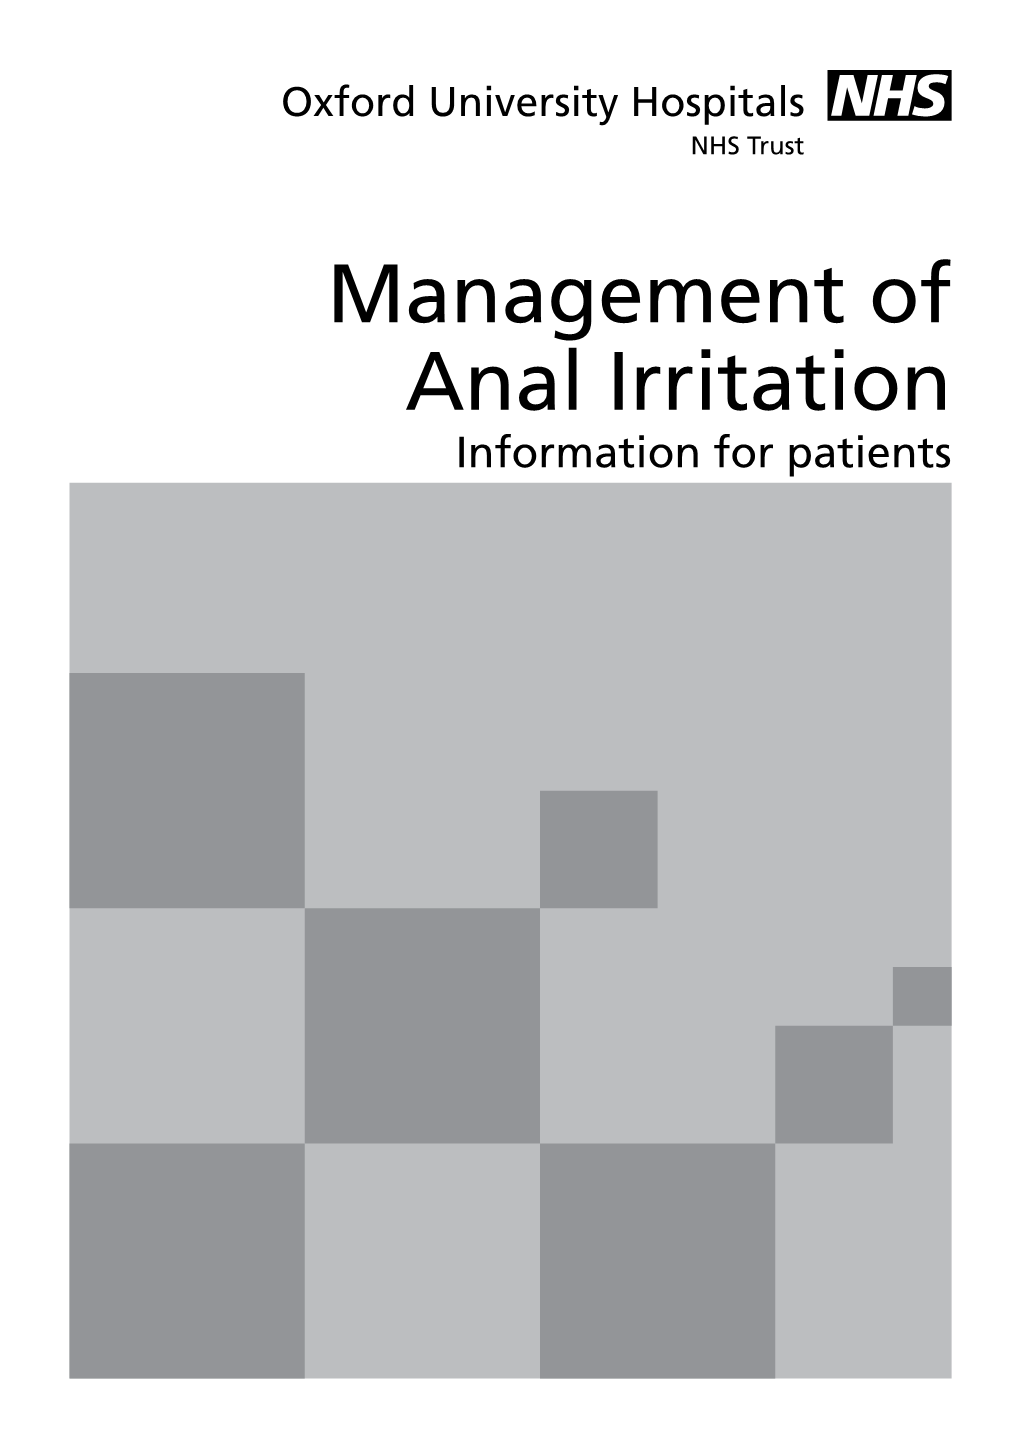 Management of Anal Irritation Information for Patients Good Hygiene Is Very Important